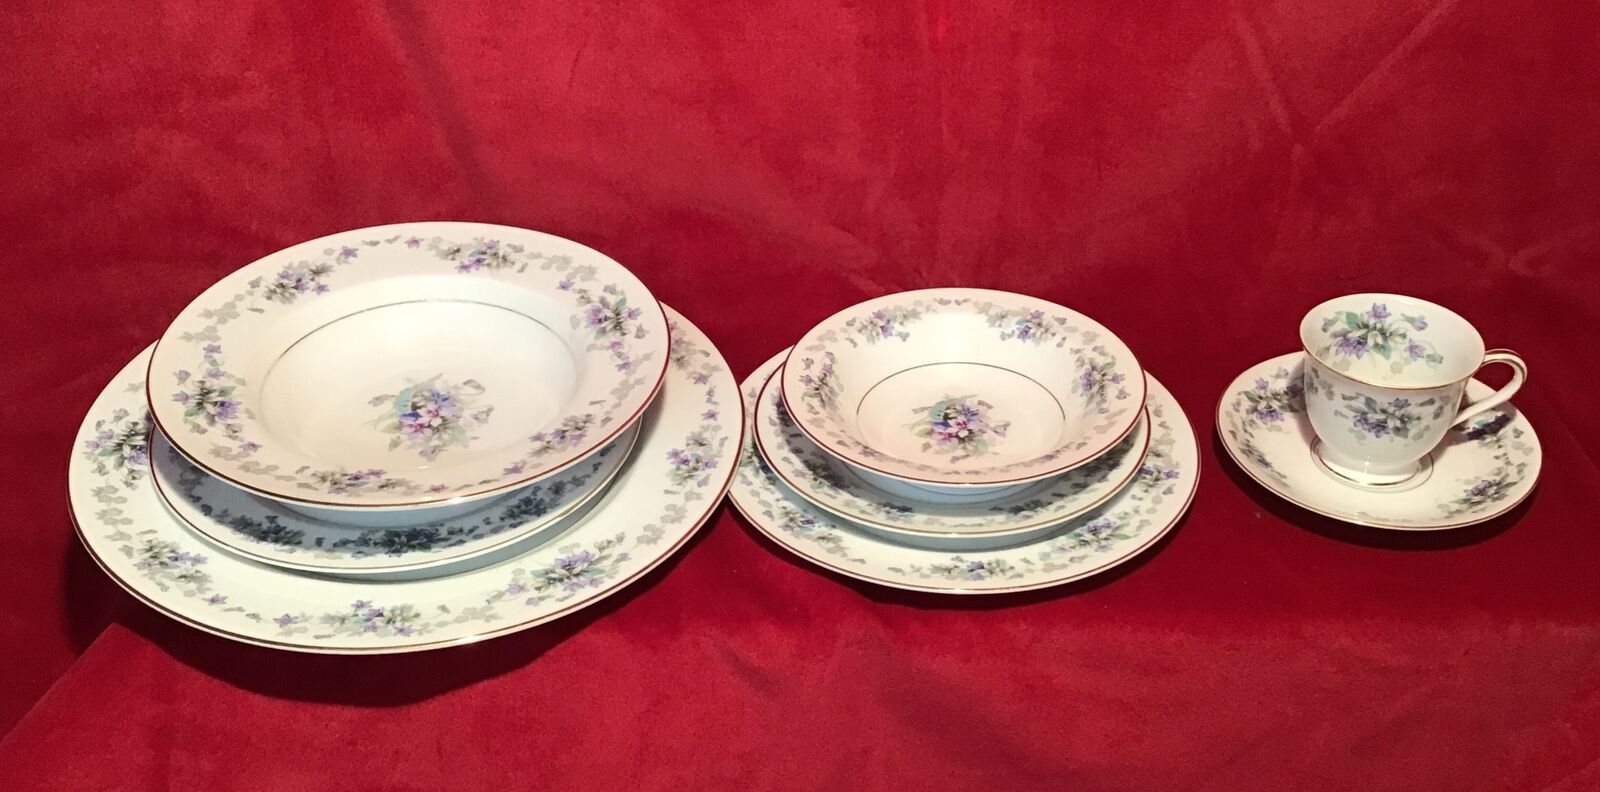 Noritake “Violette” 7-piece Set . 6 Place Settings Available. Cups Are Small -K6